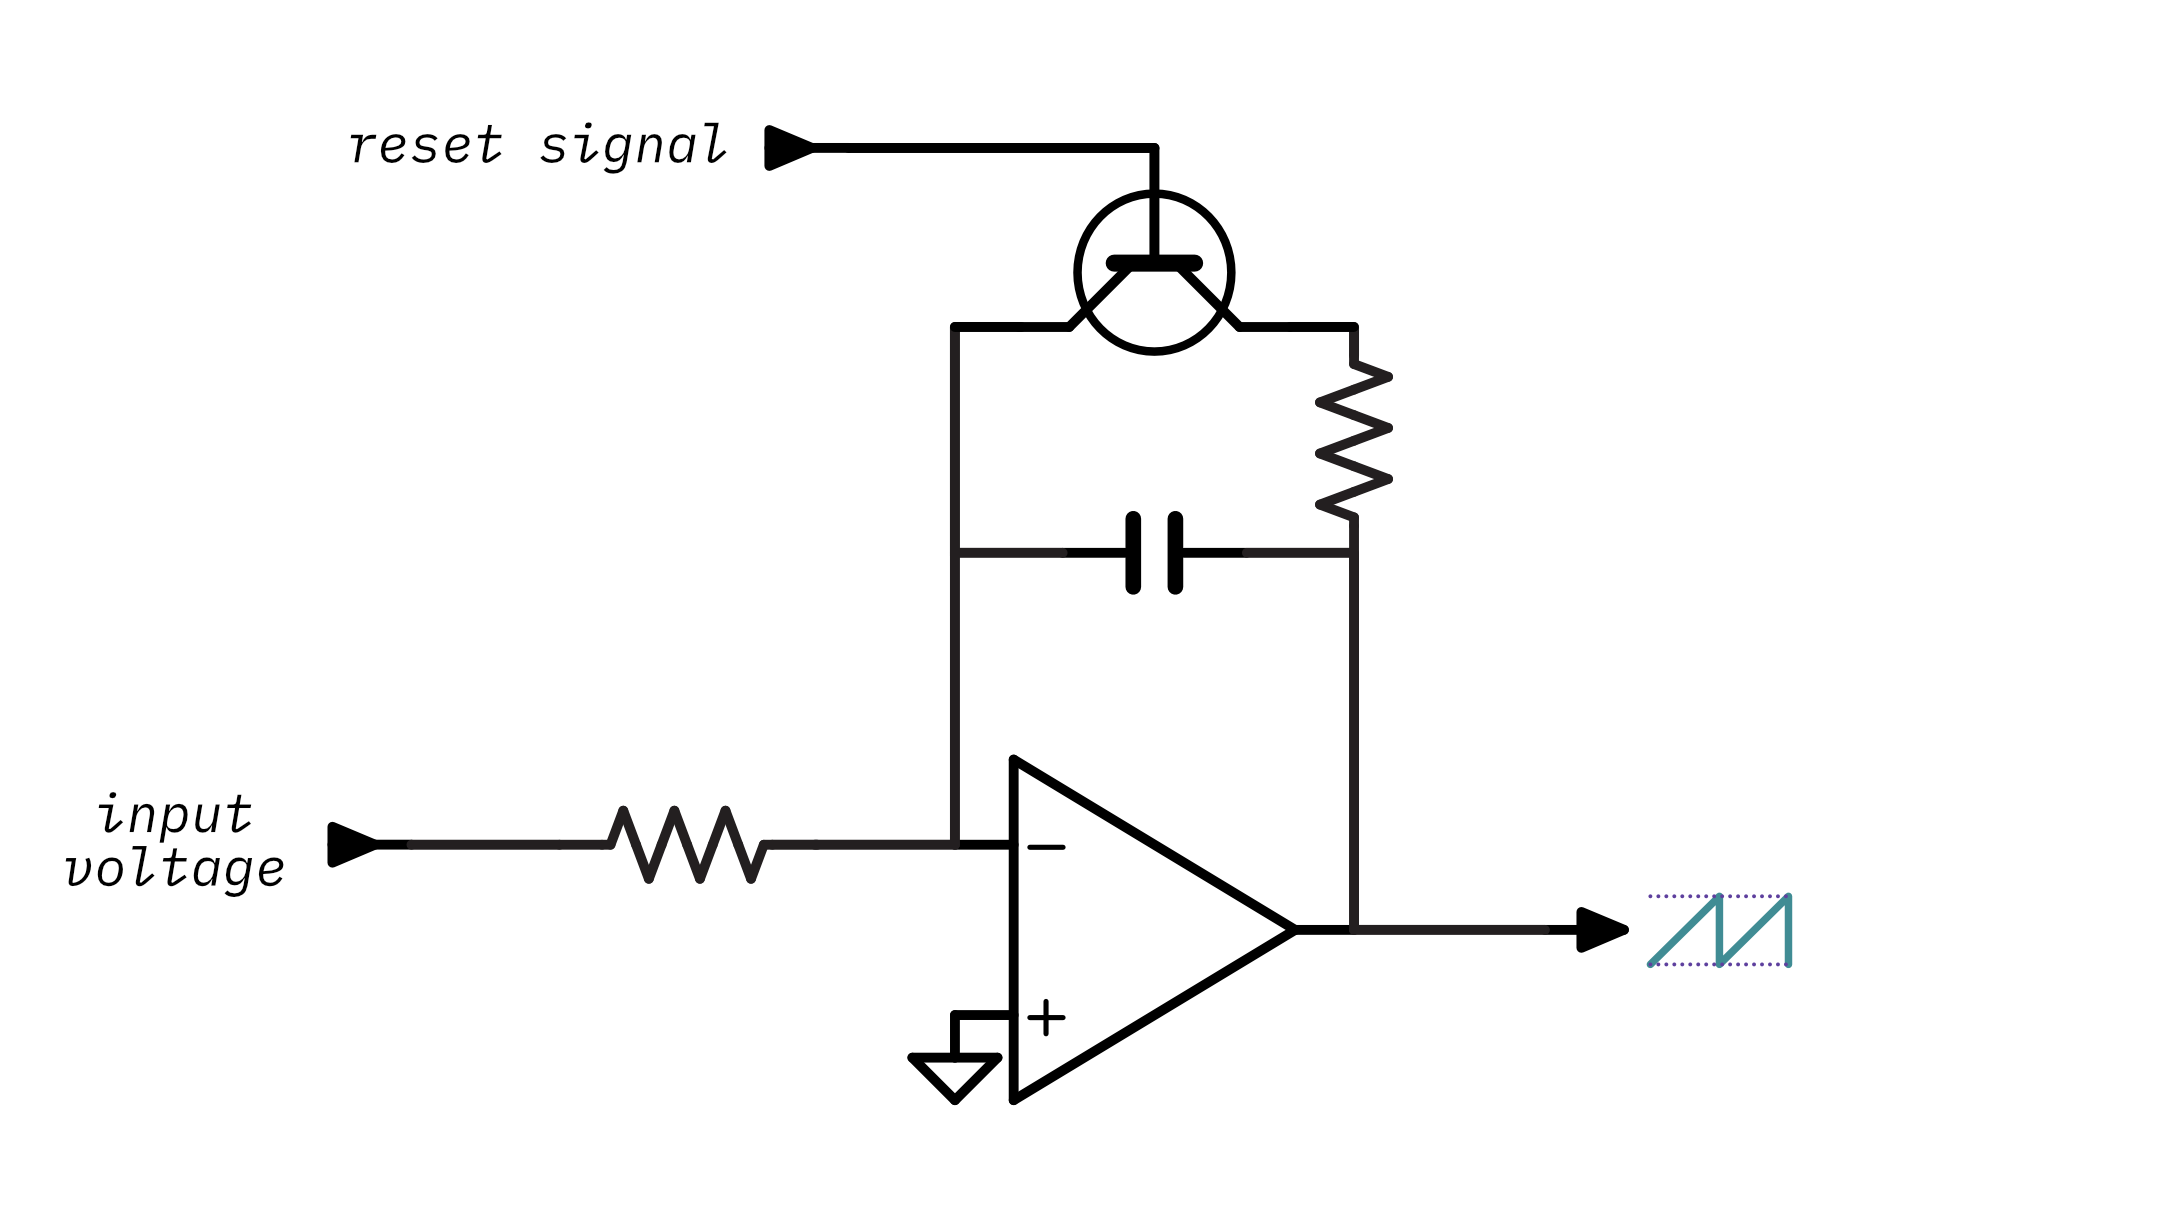 An op-amp integrator with a transistor to discharge the capacitor